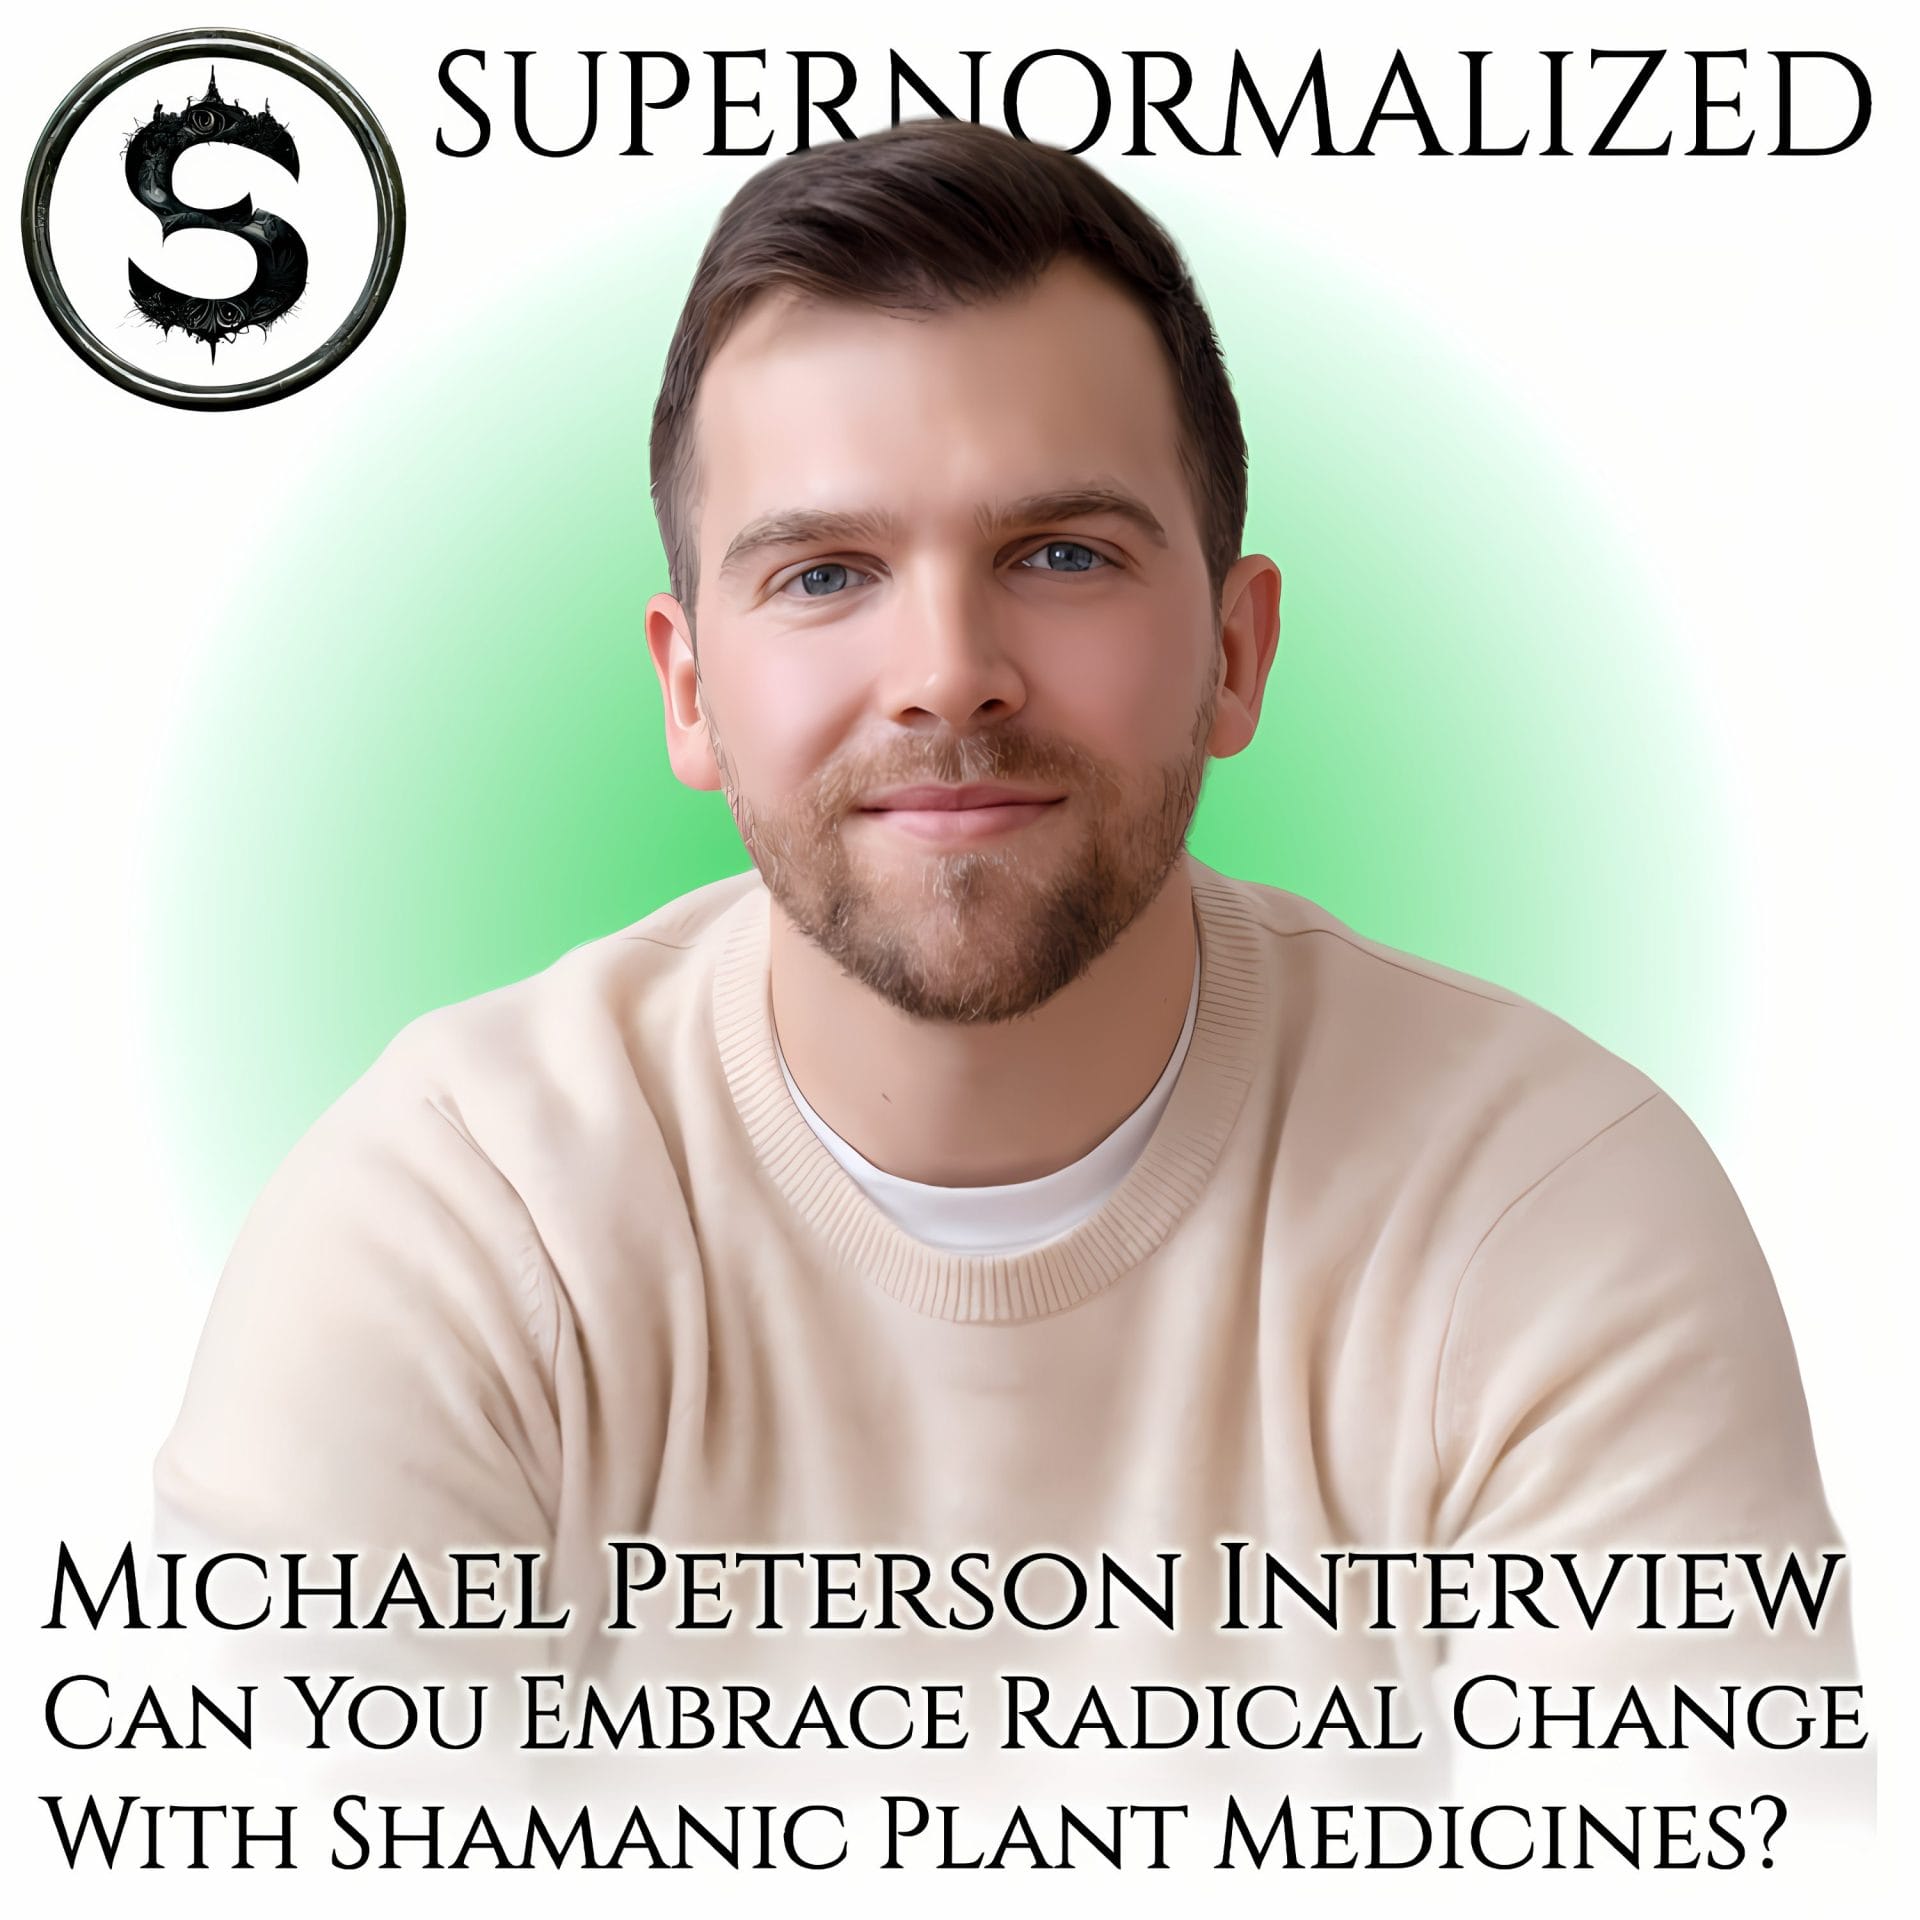 Michael Peterson Interview Can You Embrace Radical Change With Shamanic Plant Medicines?